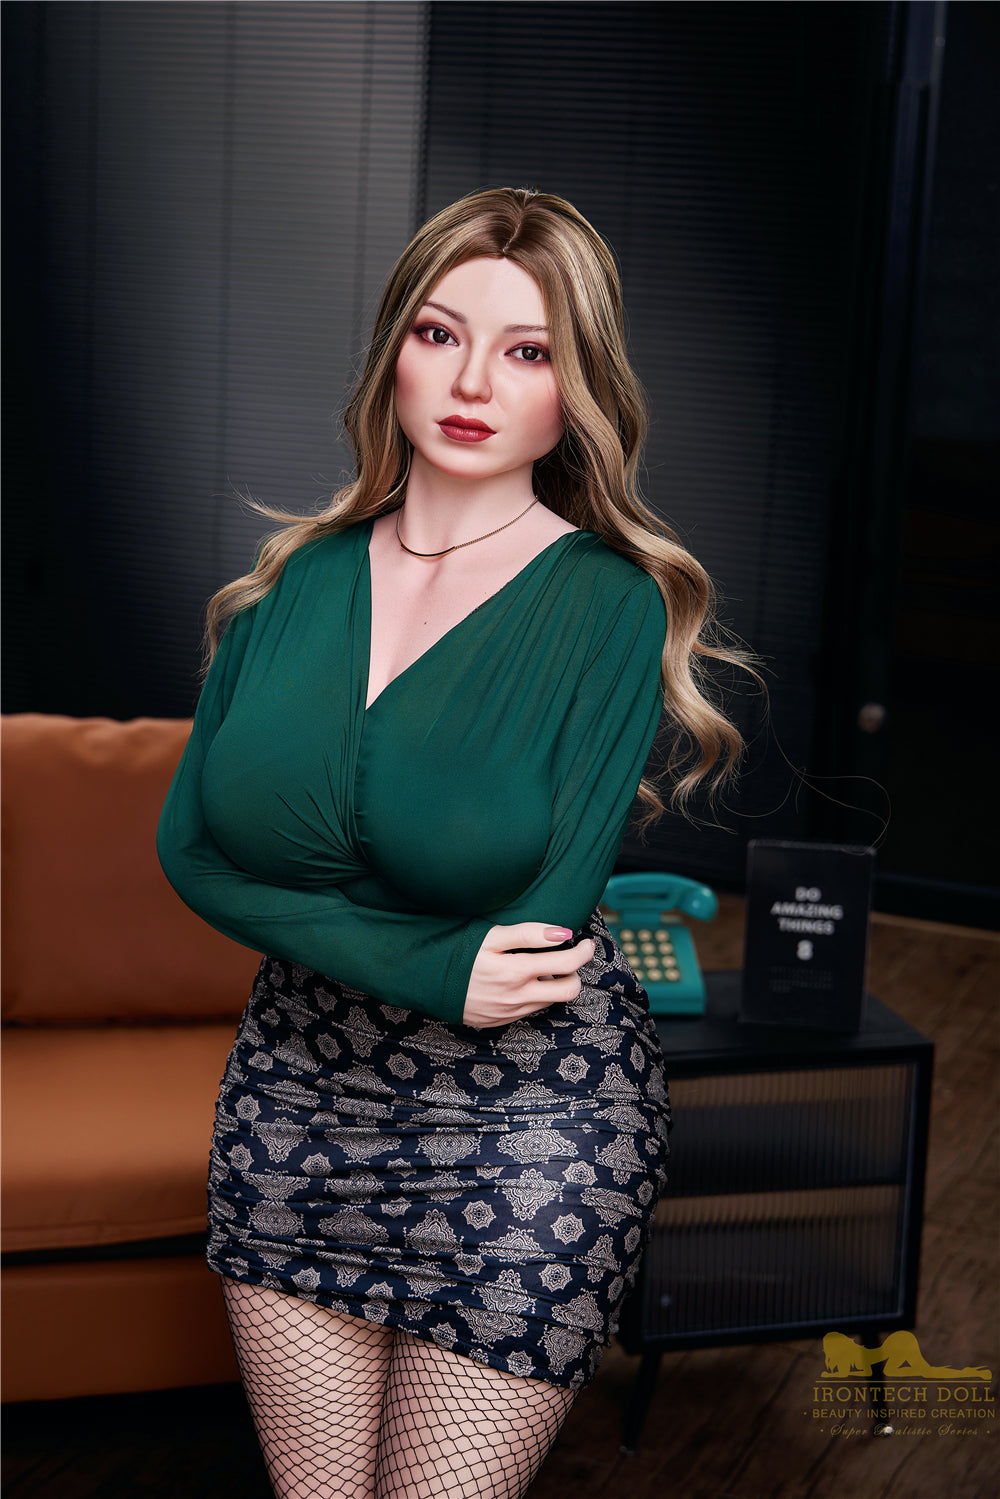 Irontech Premium Full Silicone Love Sex Doll Super Realistic Series- Cailyn 162cm